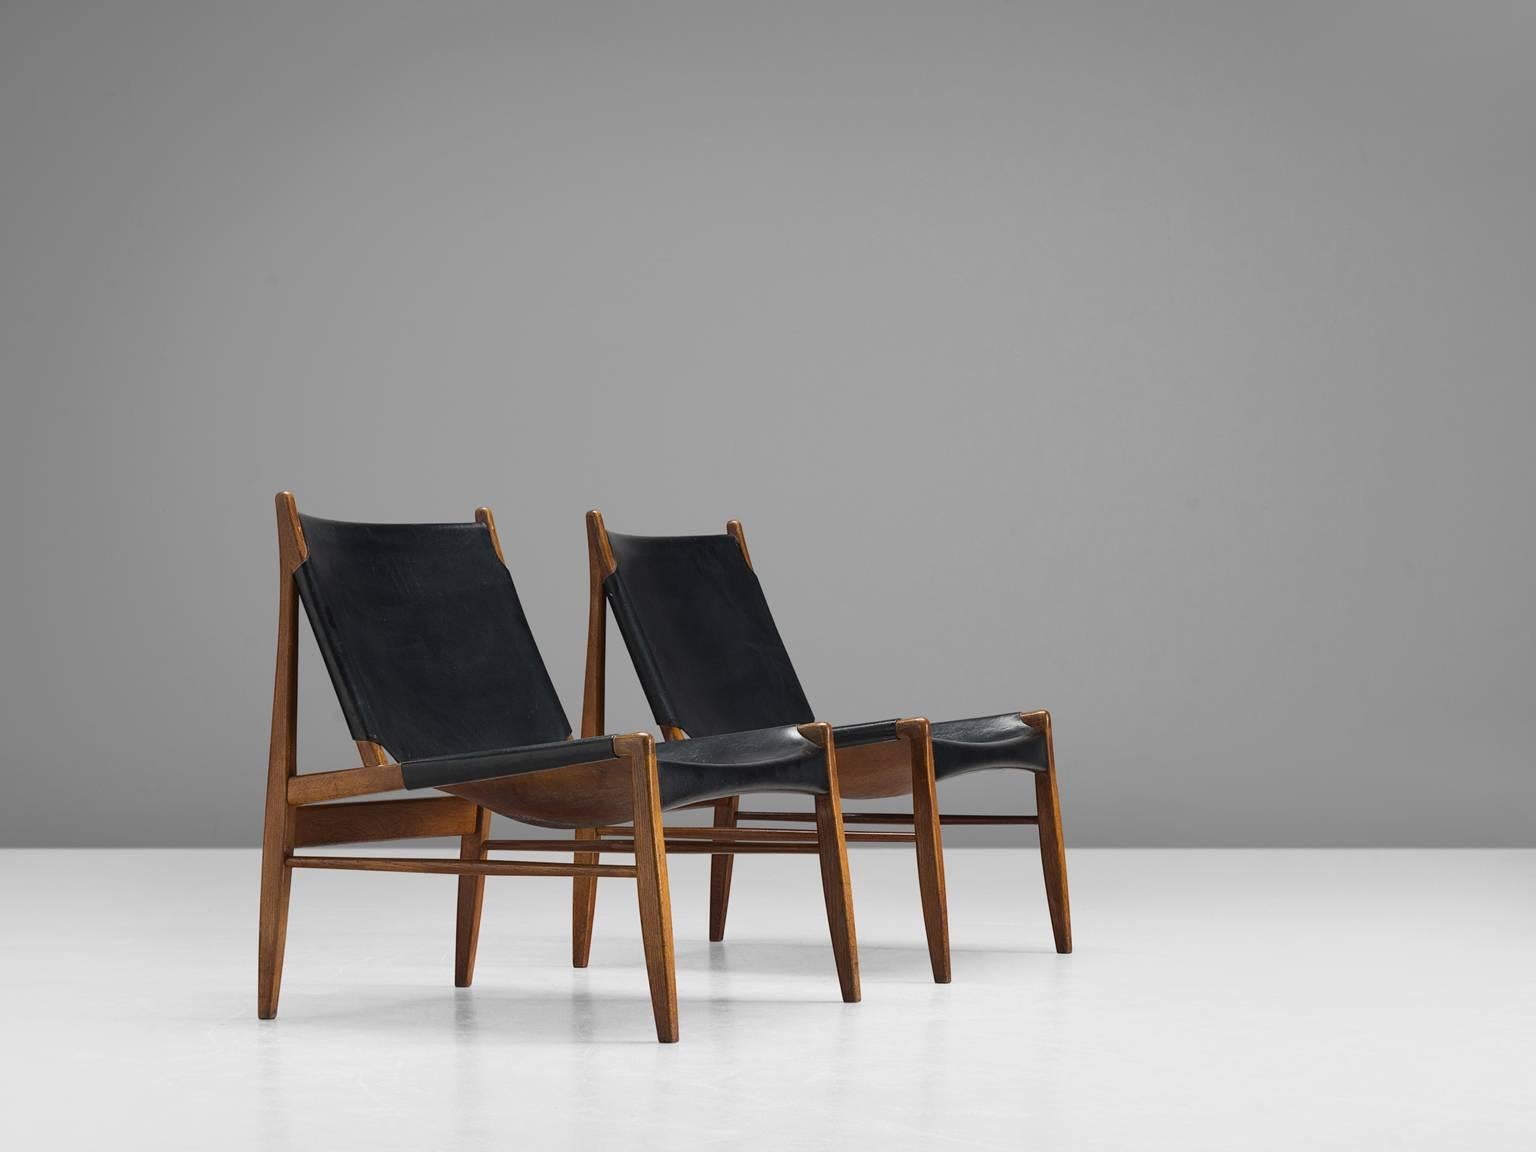 'Chimney' chairs, oak and patinated black leather by Franz Xaver Lutz for WK Verband, Germany, 1958, Germany. 

These early Chimney chairs by Franz Xaver Lutz bears strong resemblances to Spanish and Scandinavian hunting chairs. The design is